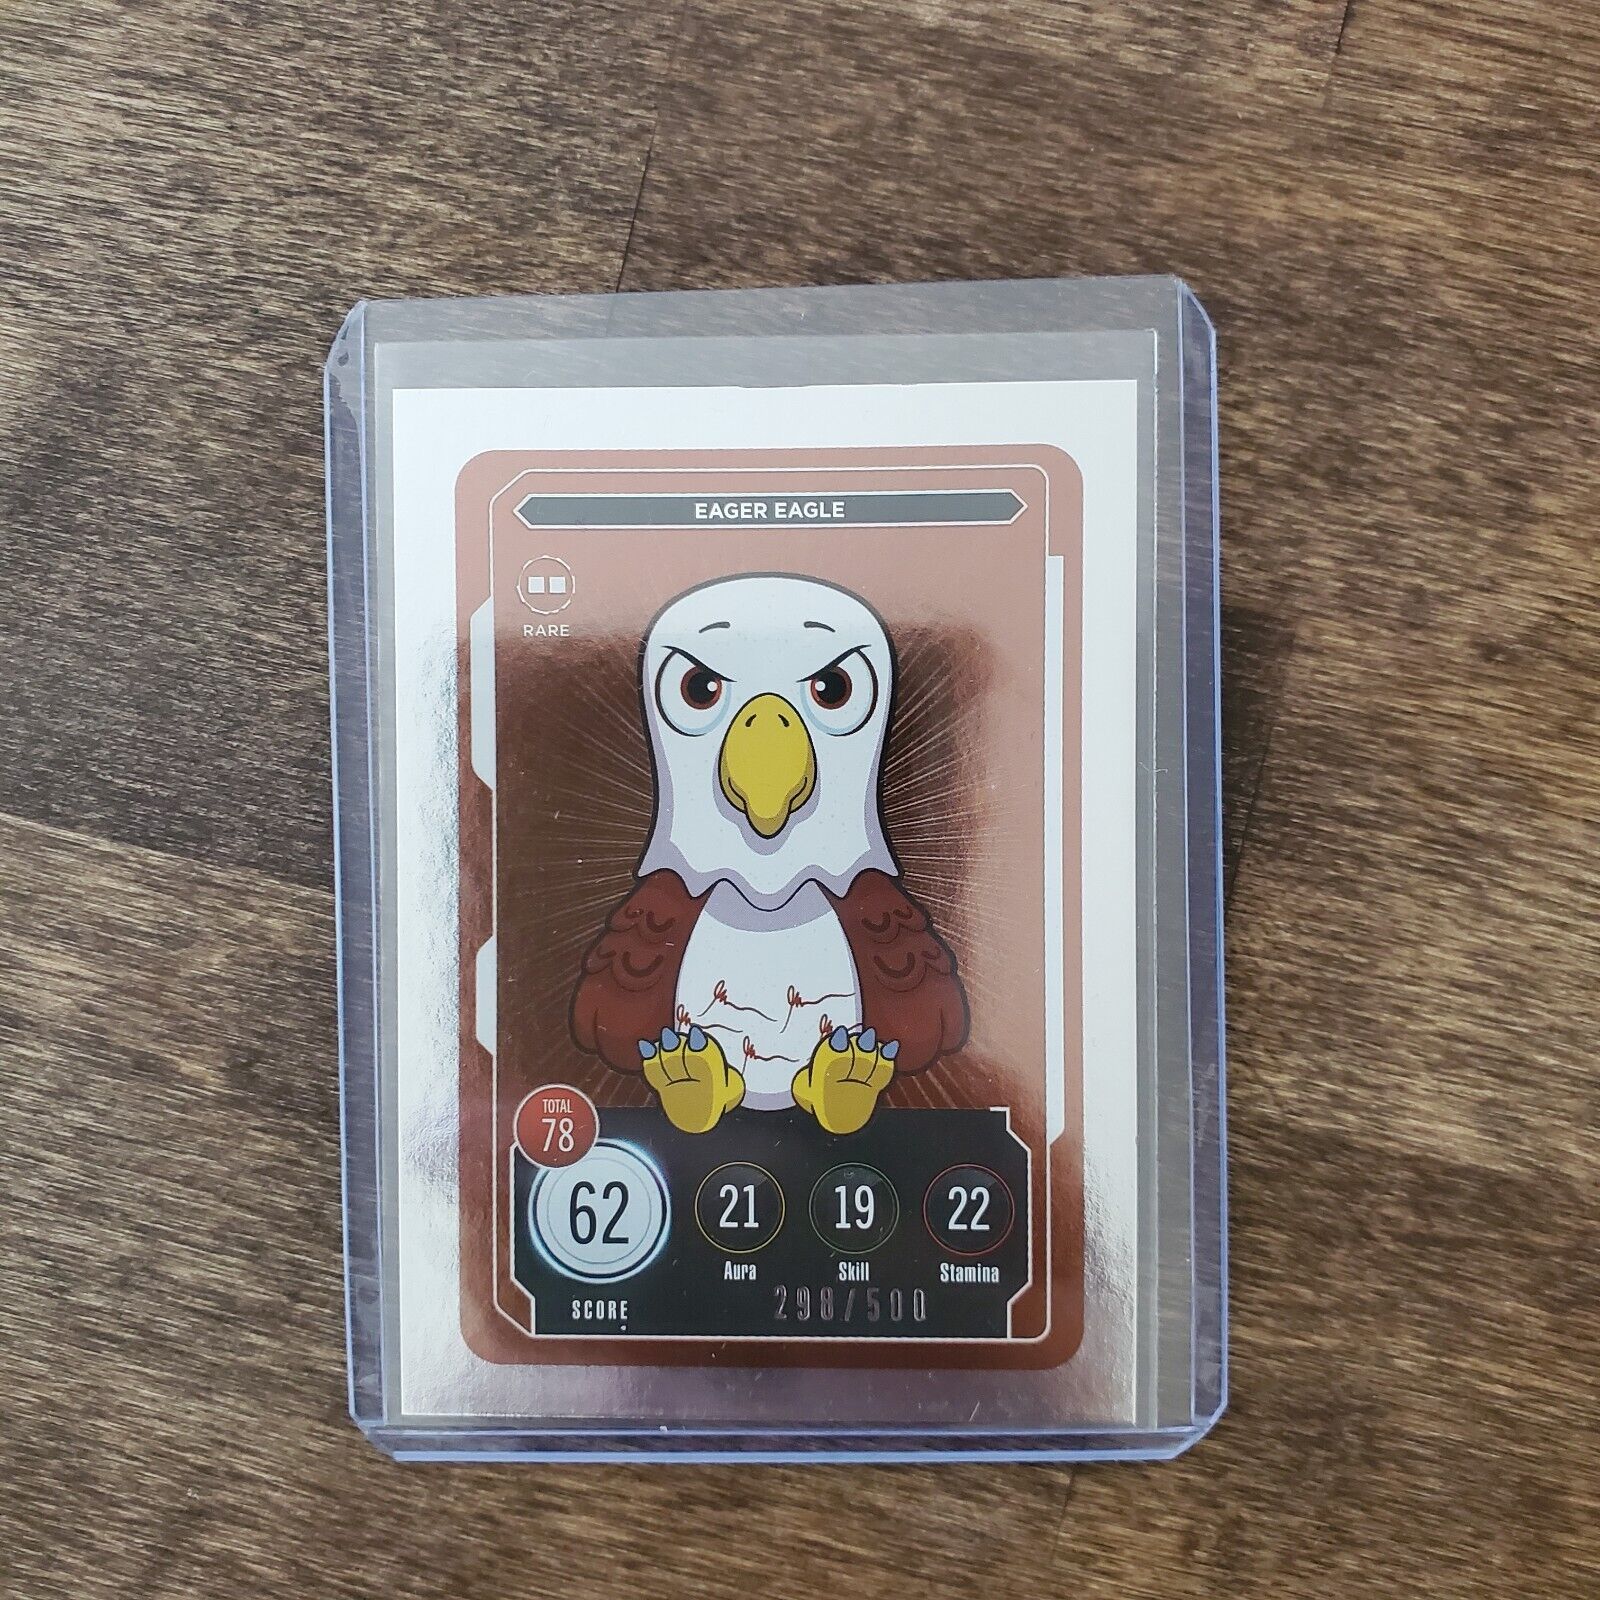 Eager Eagle Rare Veefriends Series 2 Compete and Collect Card